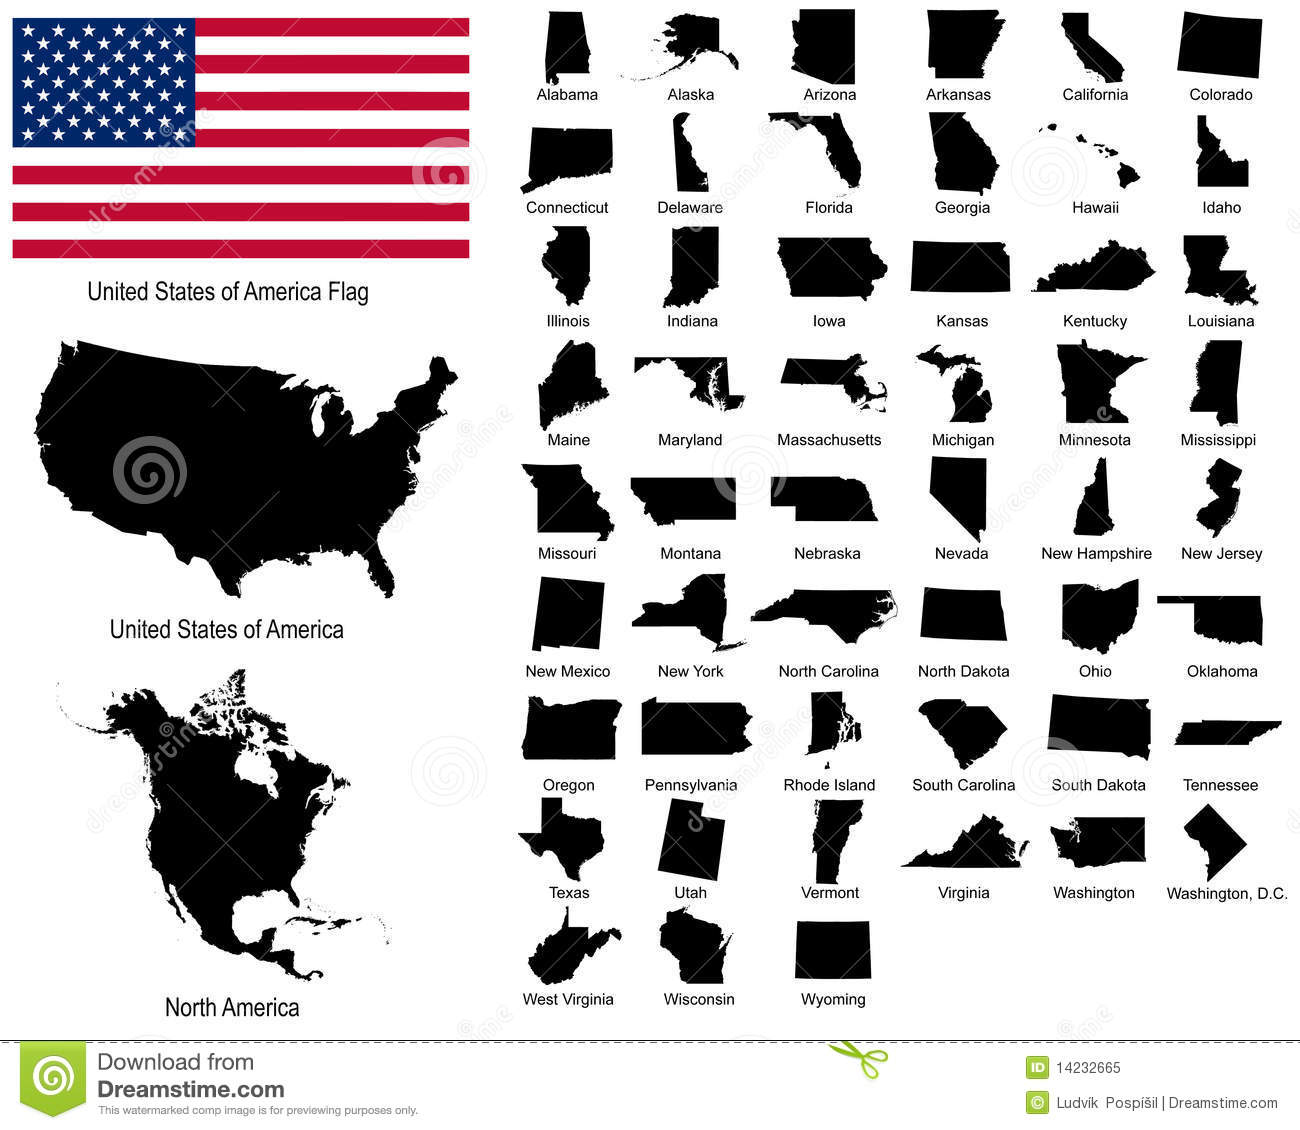 Shapes of the 50 States in the USA